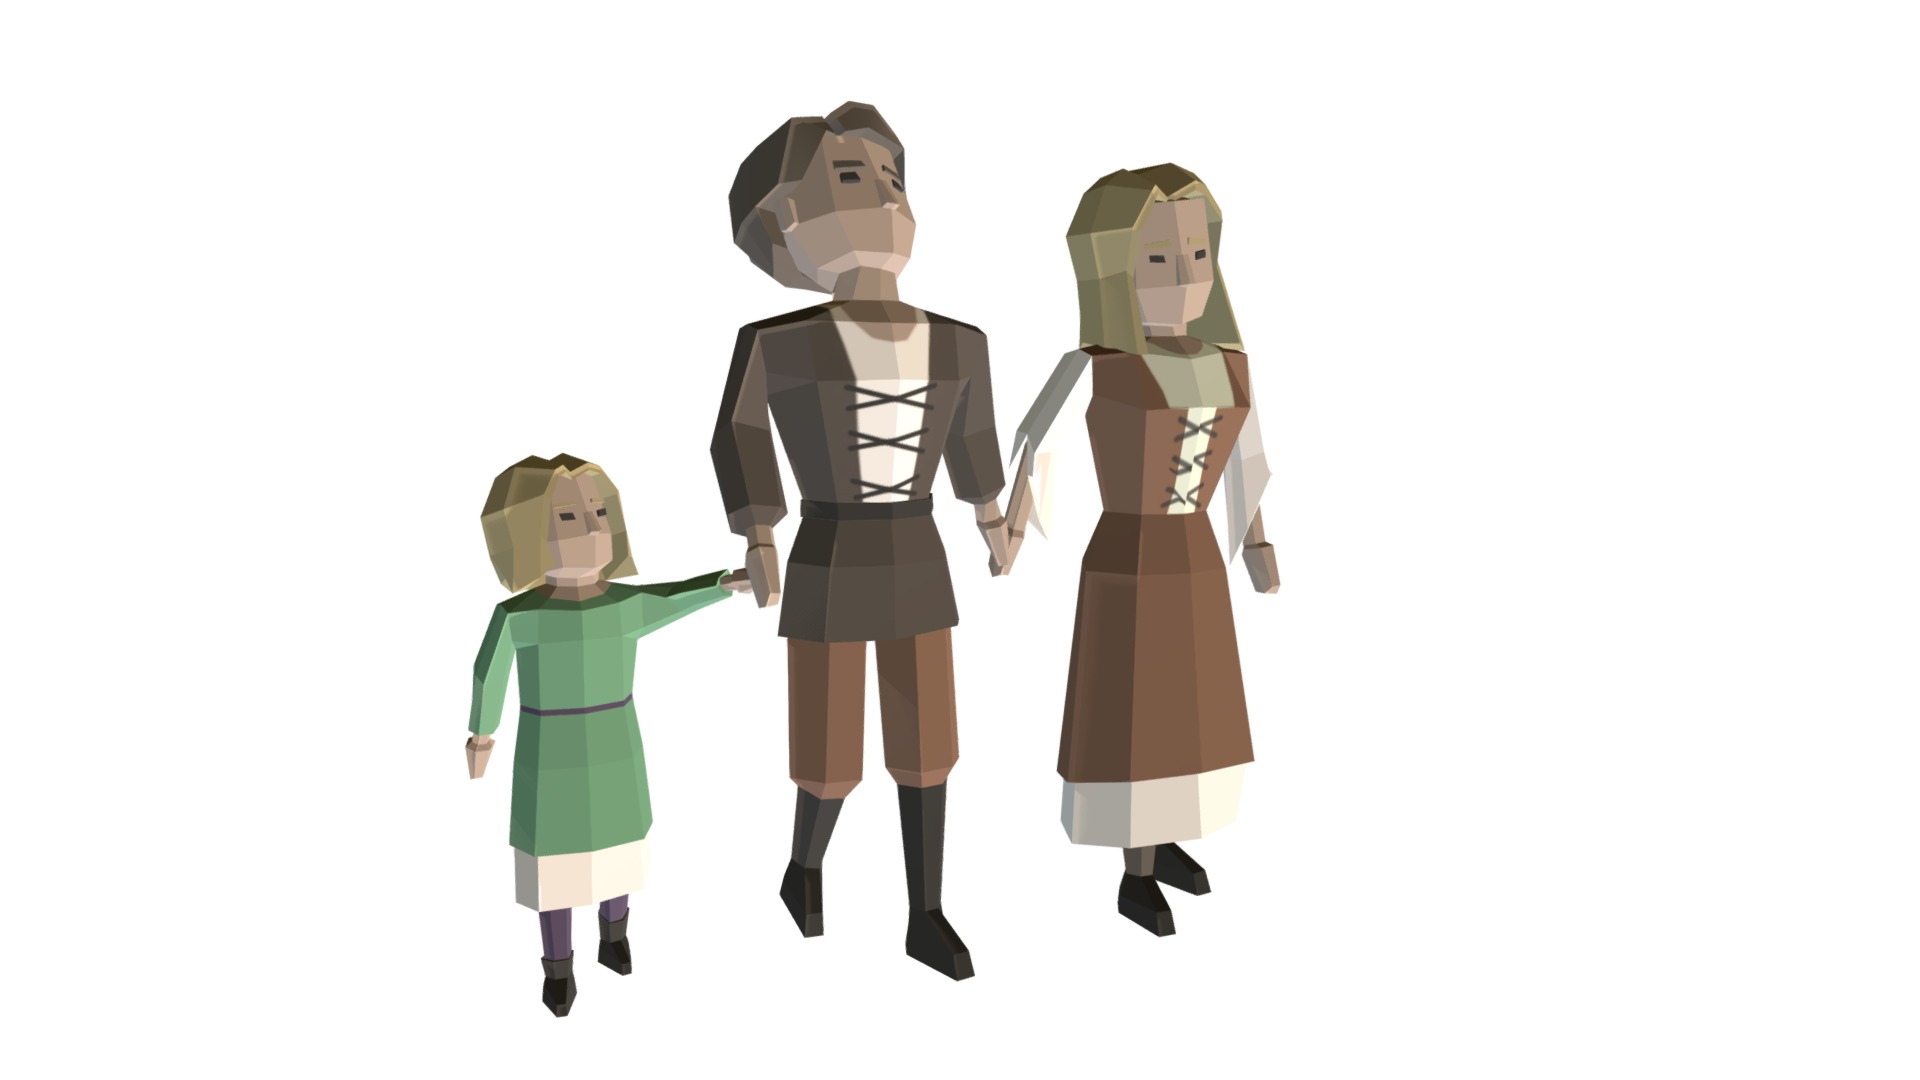 3D model Peasant Family #2 - This is a 3D model of the Peasant Family #2. The 3D model is about a couple of people in clothing.